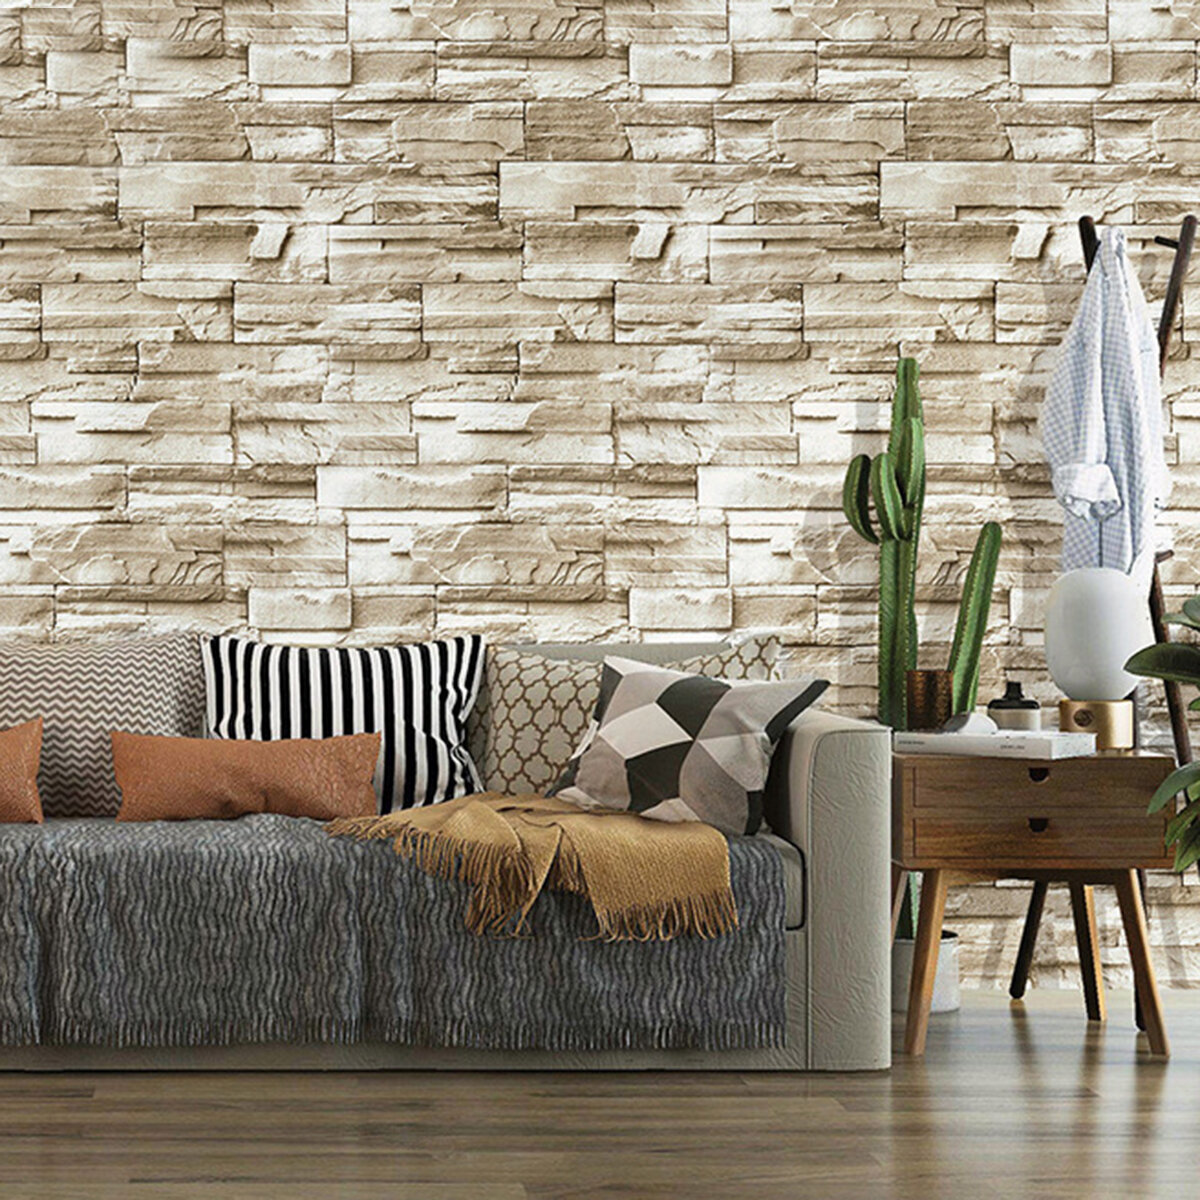 

3D PVC Wall Stickers Paper Brick Stone Wallpaper DIY Rustic Effect Self Adhesive for Home Living Room Decor Sticker